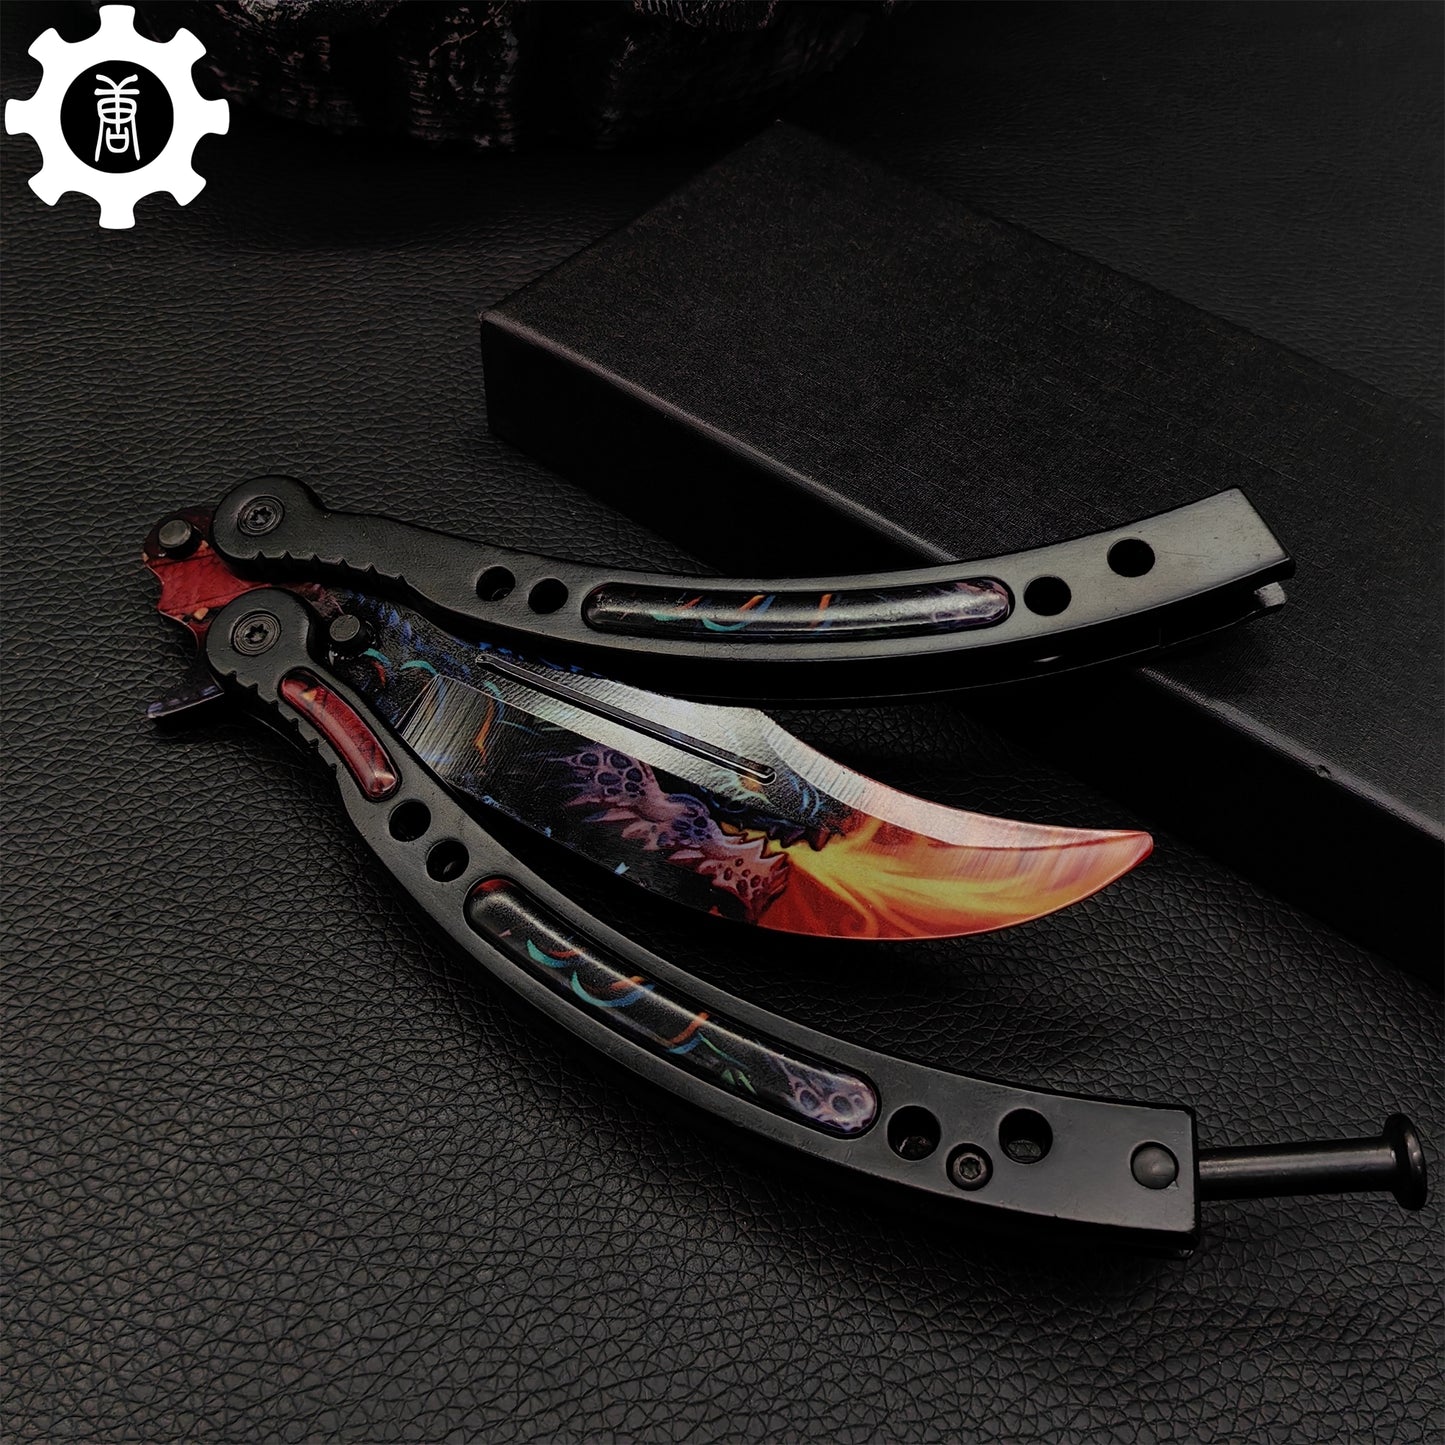 Game Butterfly Knife Dragonfire Pattern Metal Balisong Trainer